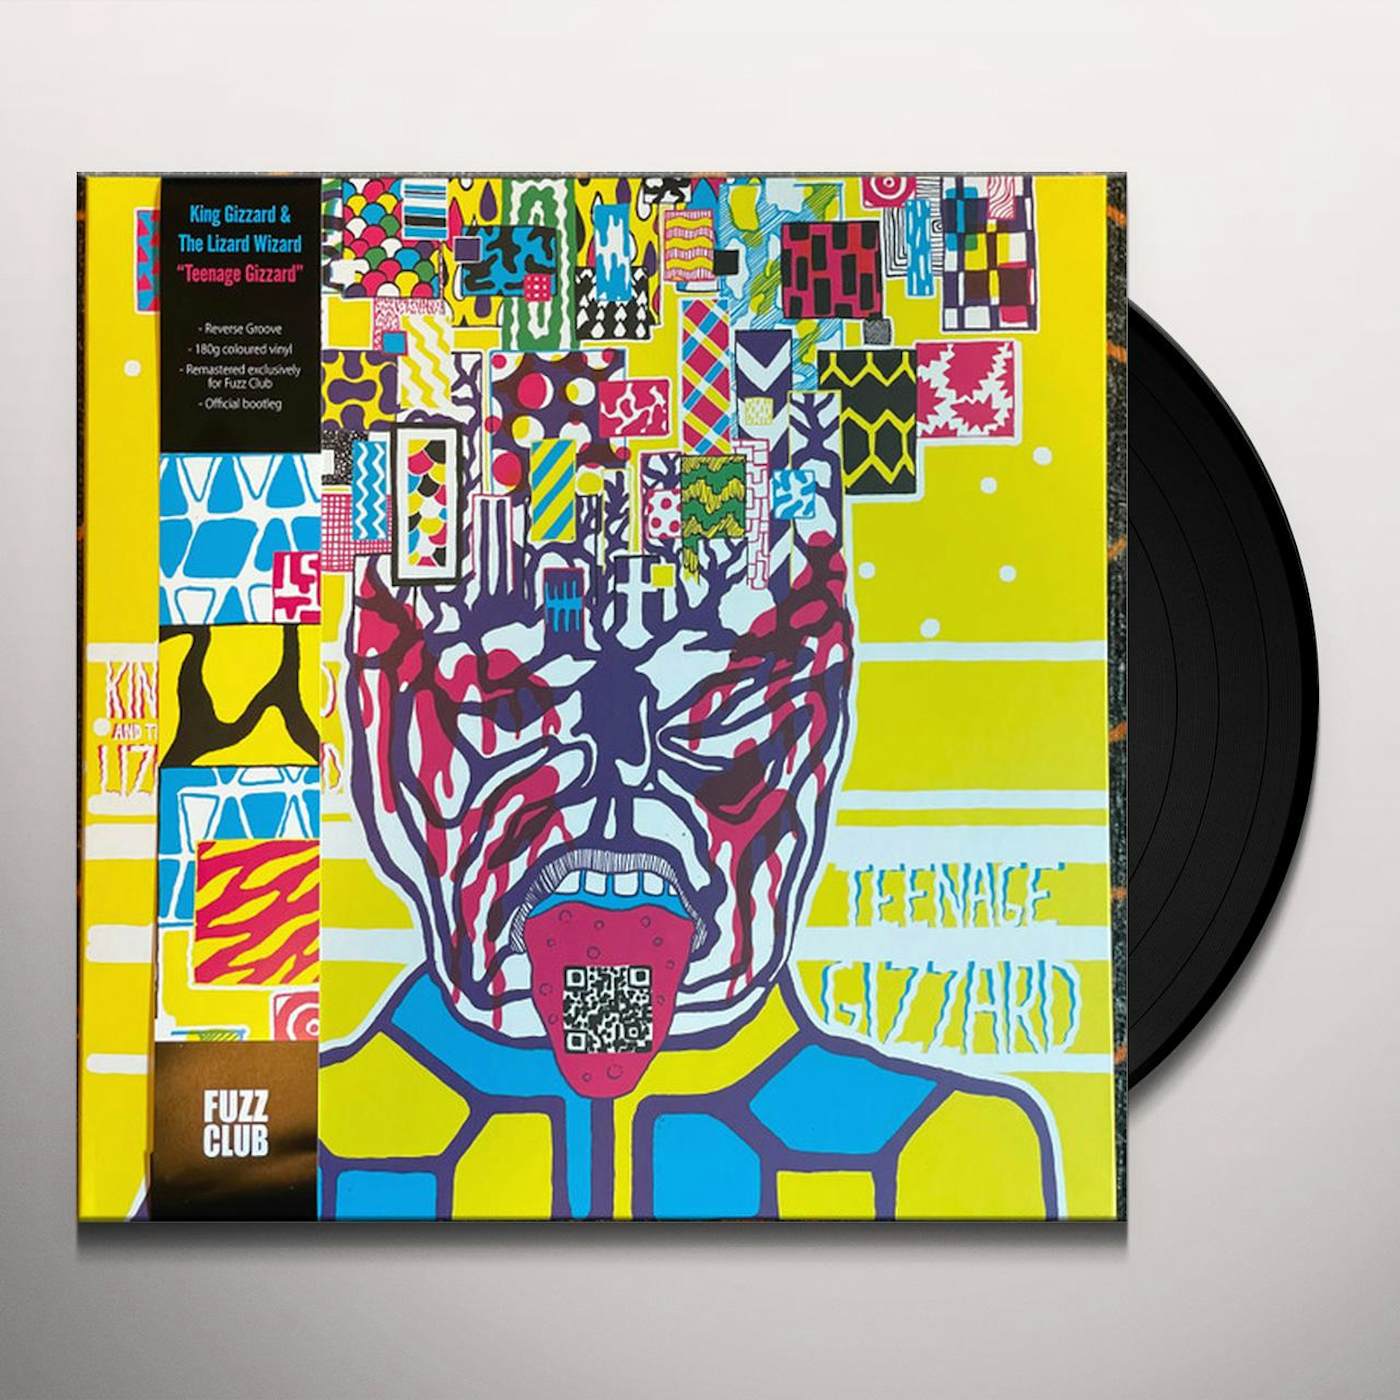 Butterfly 3000 (English Cover LP) by King Gizzard and the Lizard Wizard  (Record, 2021) for sale online